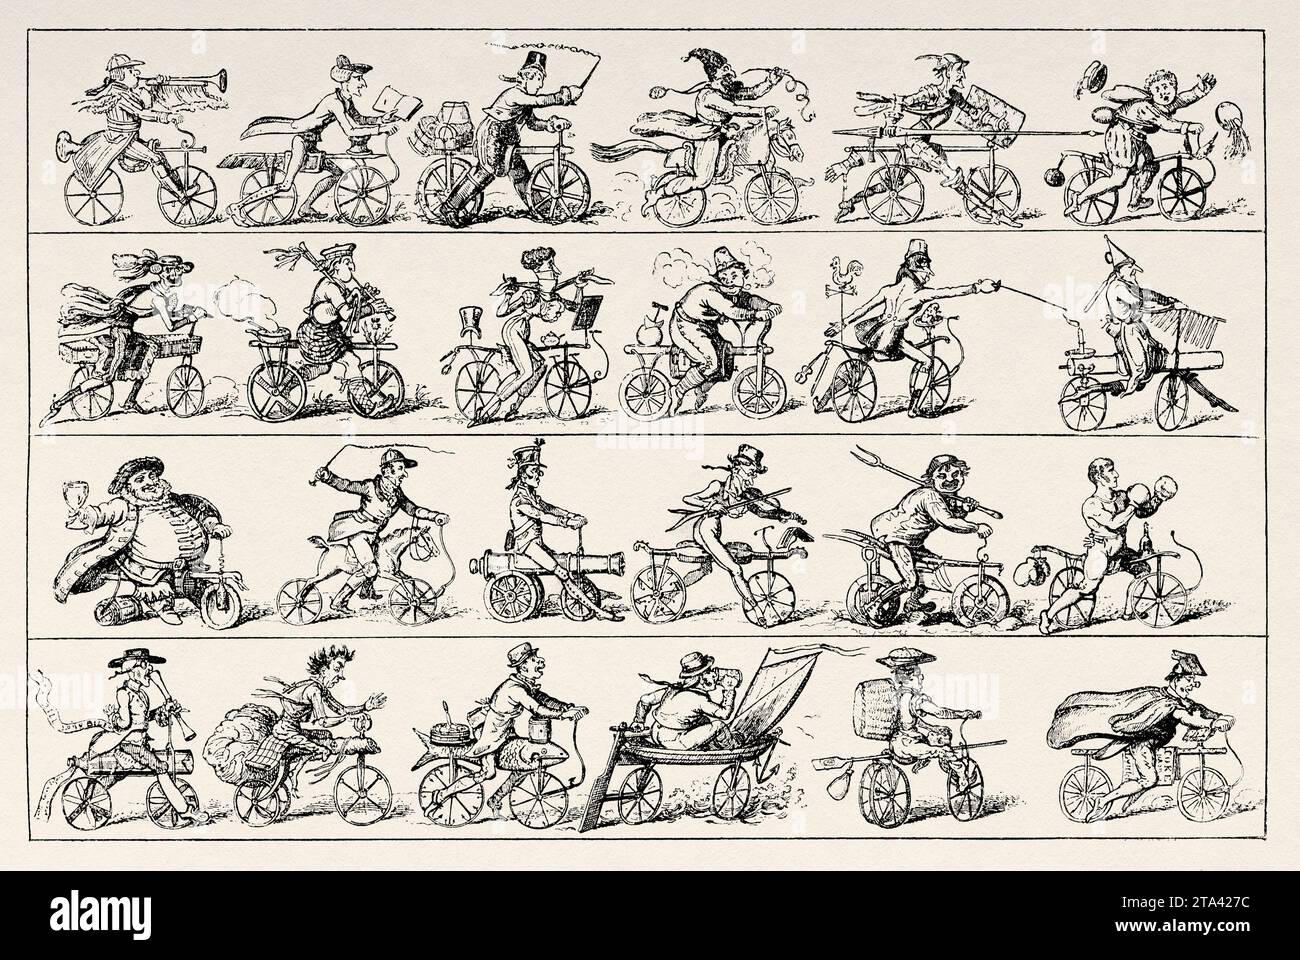 Velocipede. Every Man on his Perch, or Going to the Hobby Fair. English cartoon, 1819, by George Cruikshanks on the velociped mania. Old illustration from La Nature 1887 Stock Photo